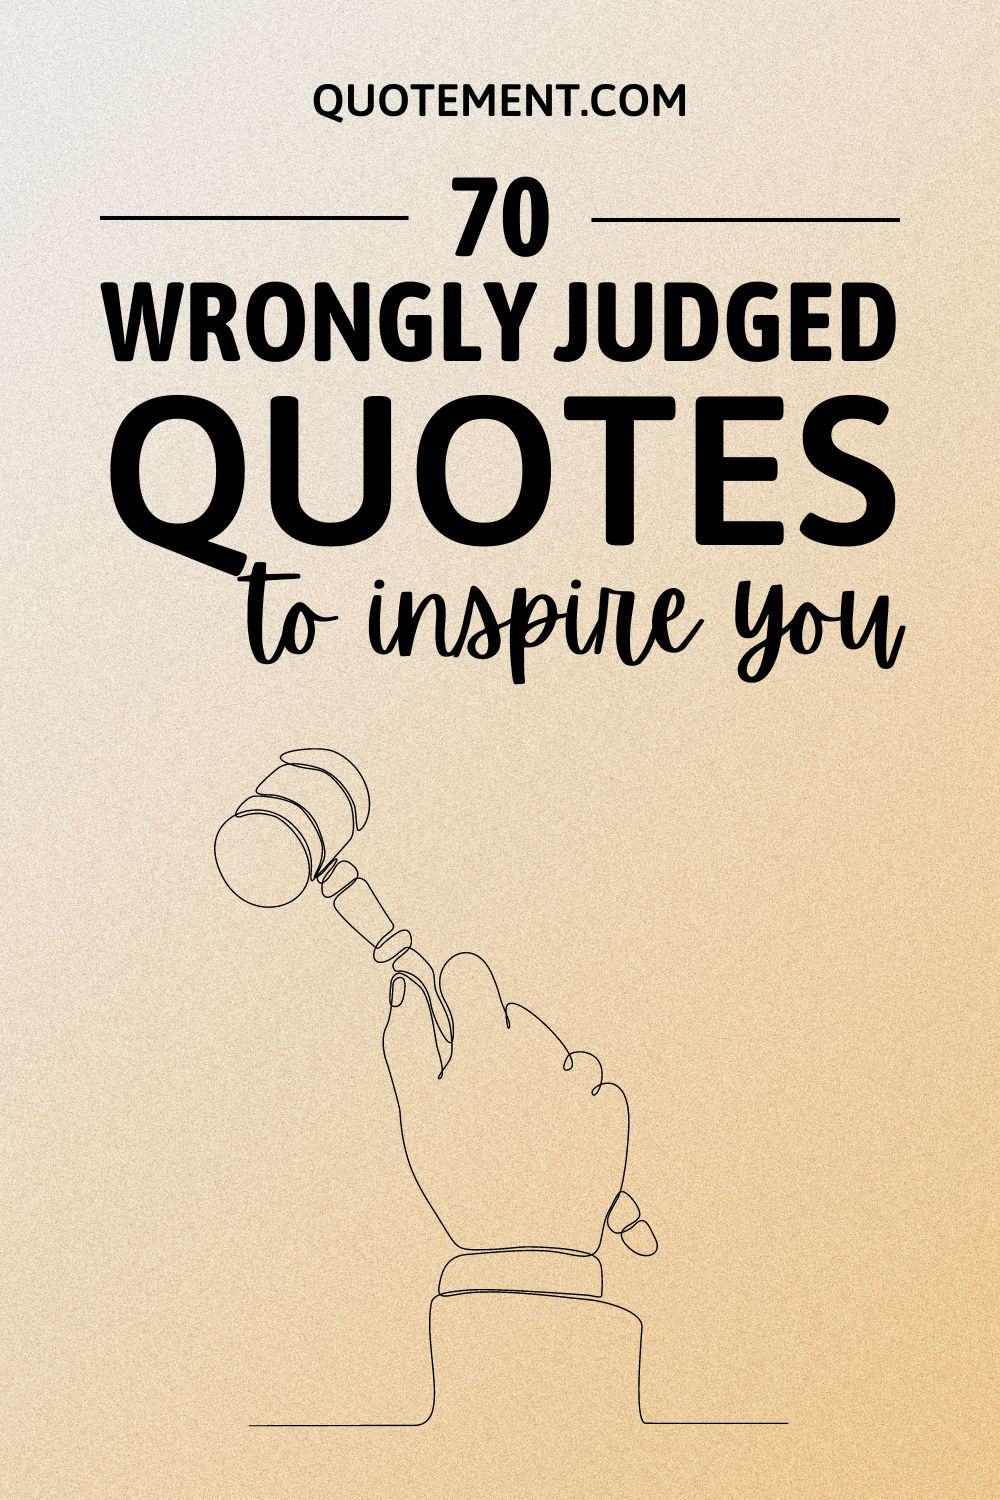 70 Wrongly Judged Quotes To Make You Stop Being Critical
